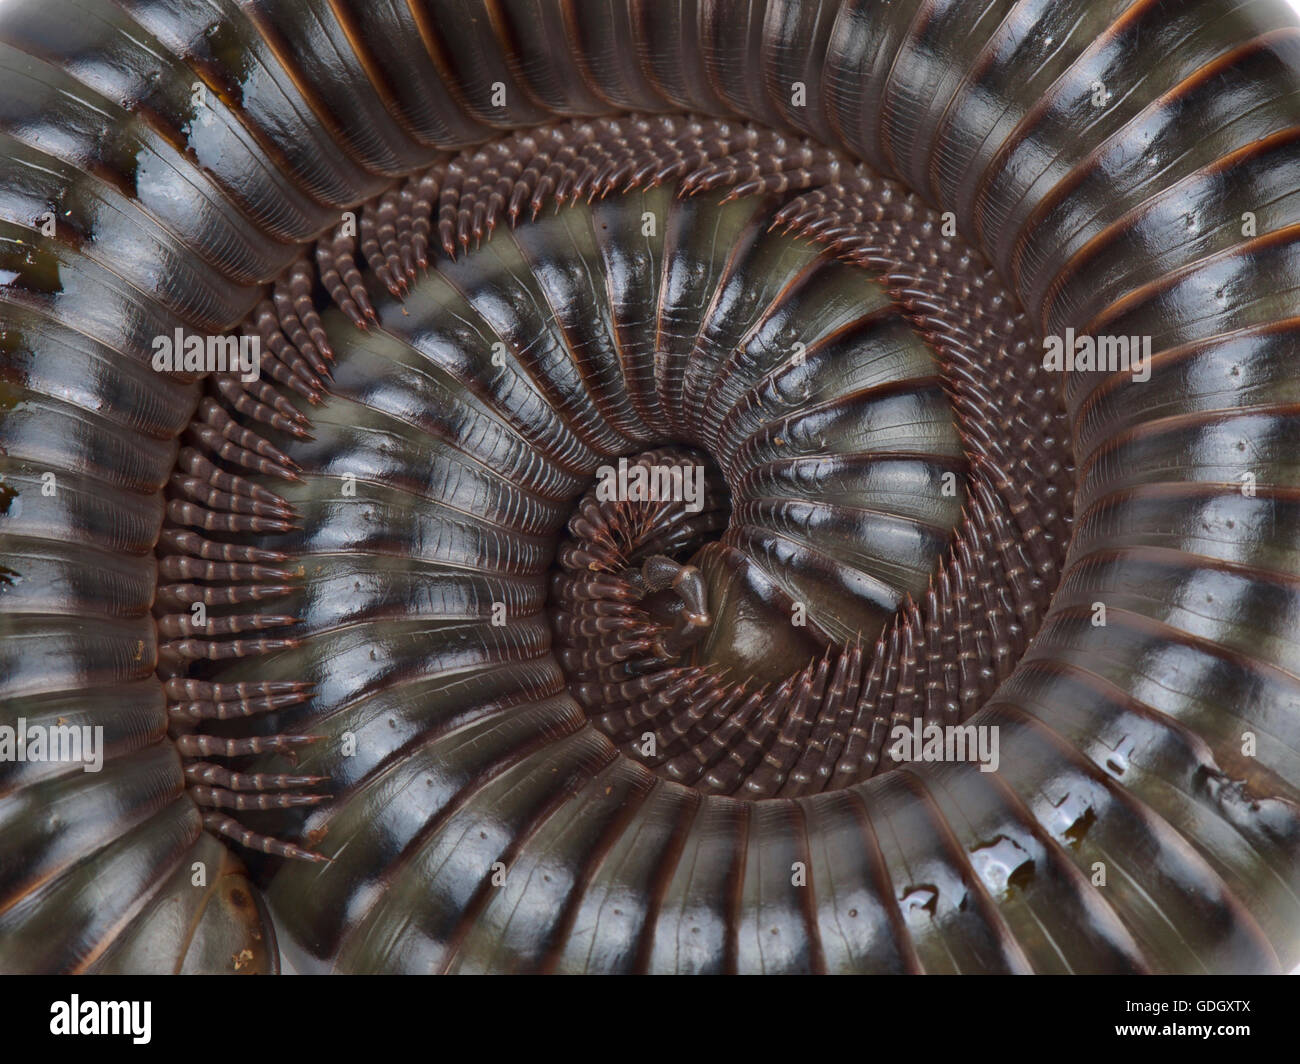 Giant African Olive millipede (Telodeinopus aoutii) Stock Photo